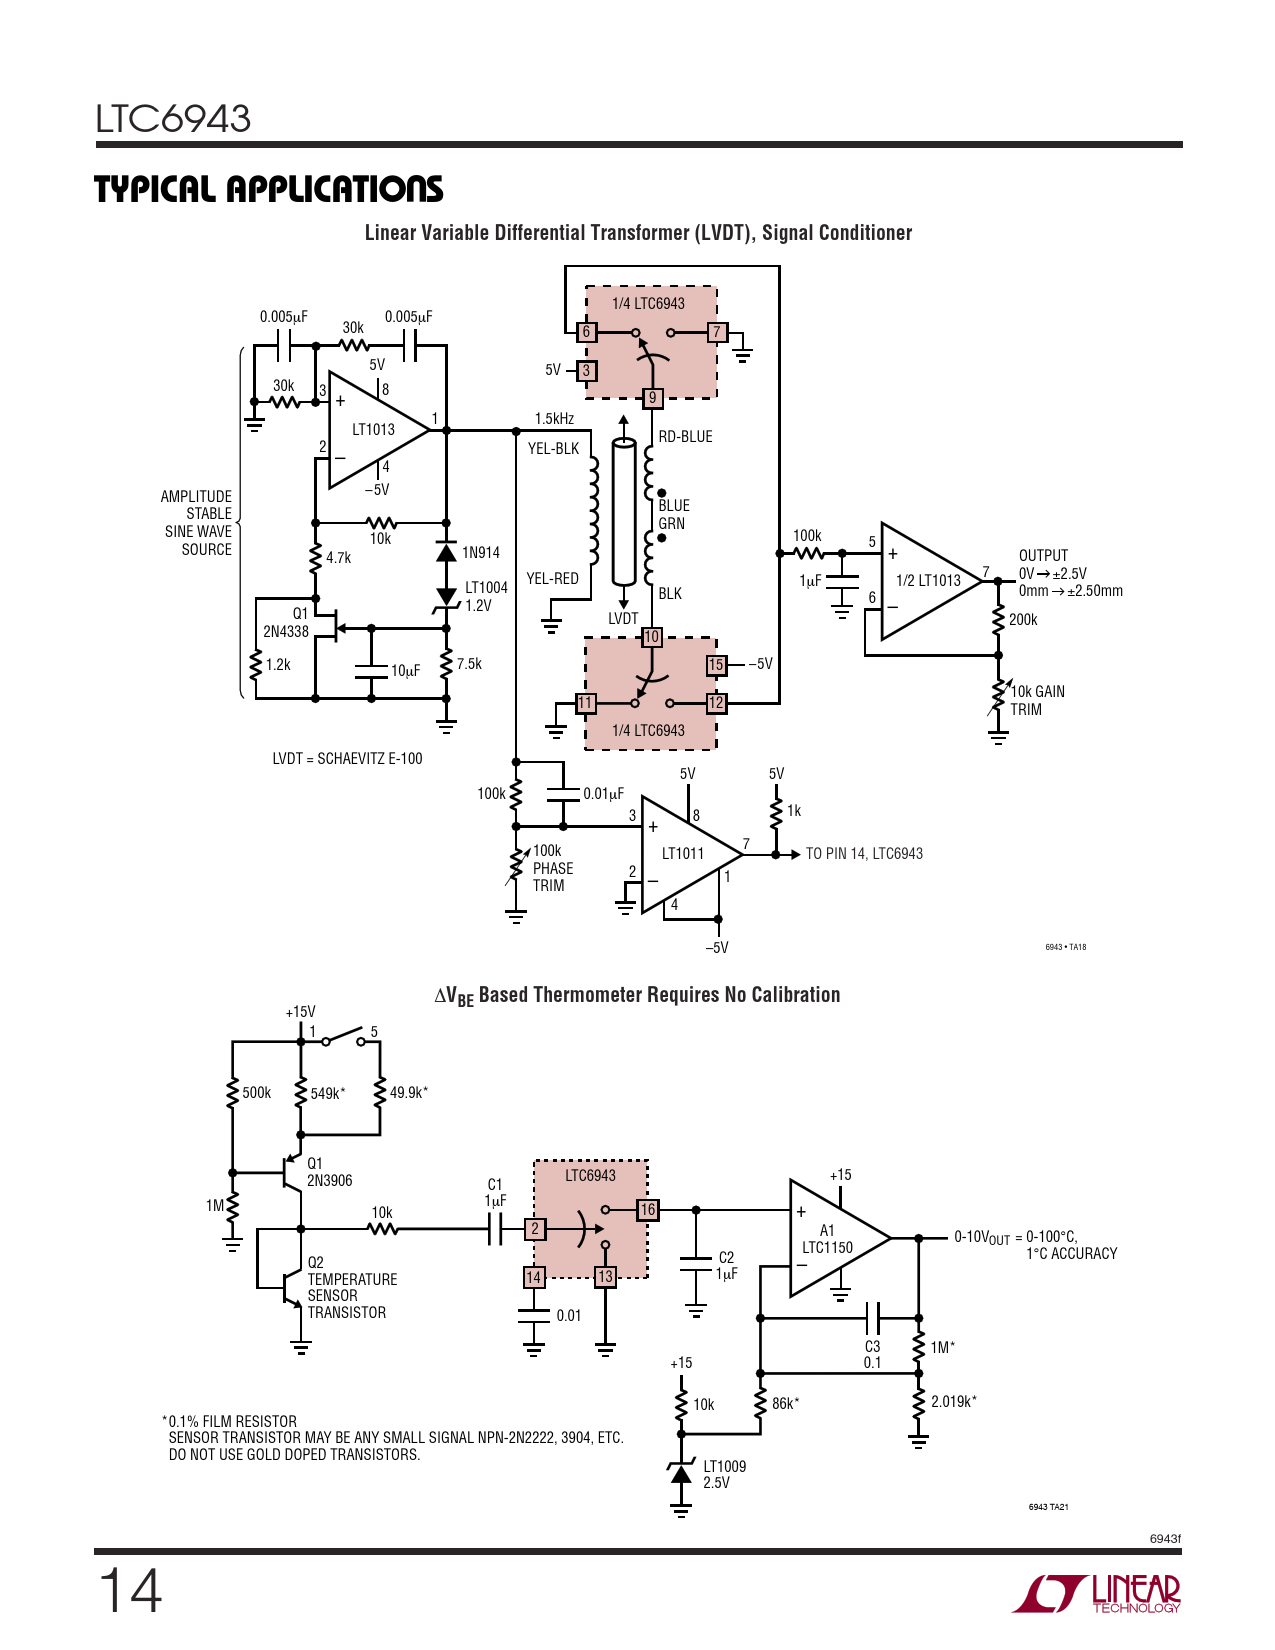 TYPICAL APPLICATIO S. Linear Variable Differential Transformer (LVDT), Signal  Conditioner - Datasheet LTC6943 Analog Devices